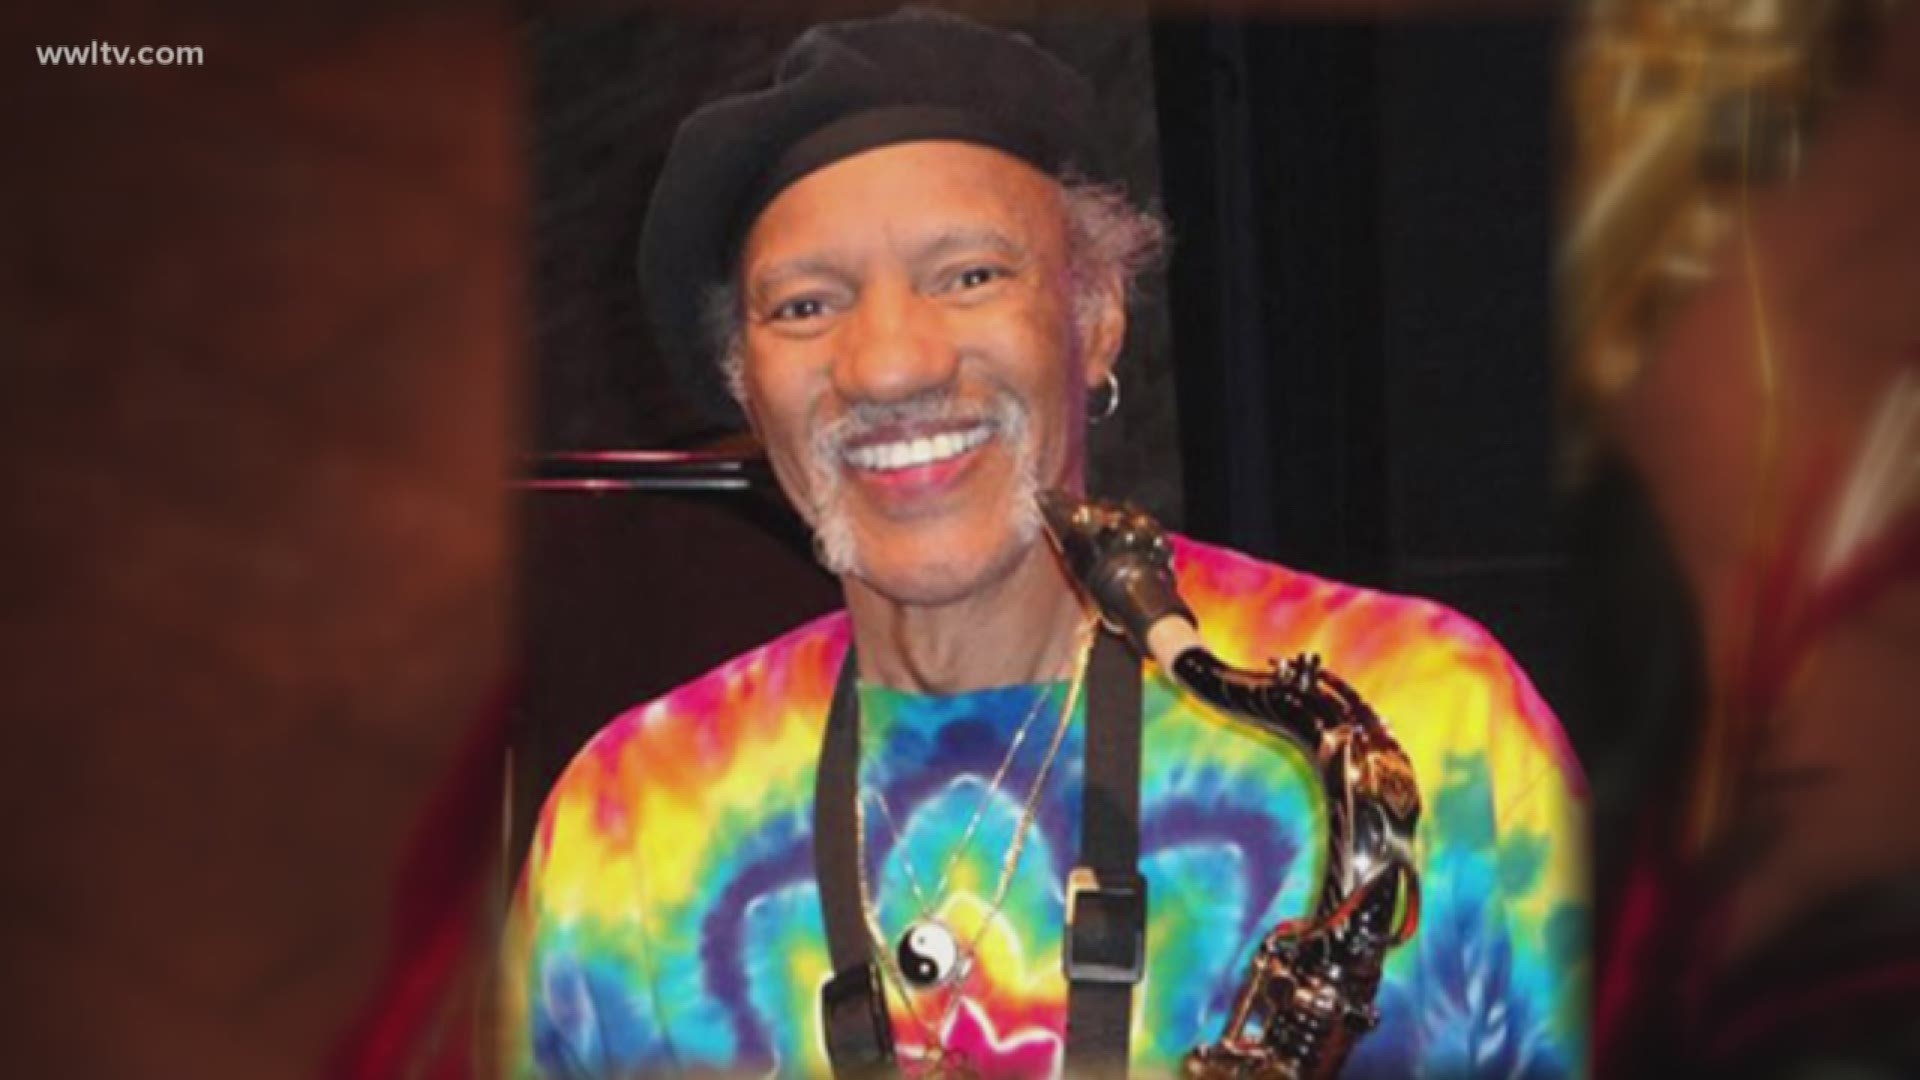 His unique sound and cool demeanor is what New Orleanians loved and admired most about Charles Neville and what set him apart from the rest. "He was a member of the first family of New Orleans funk," said Keith Spera, Entertainment Writer with the New O